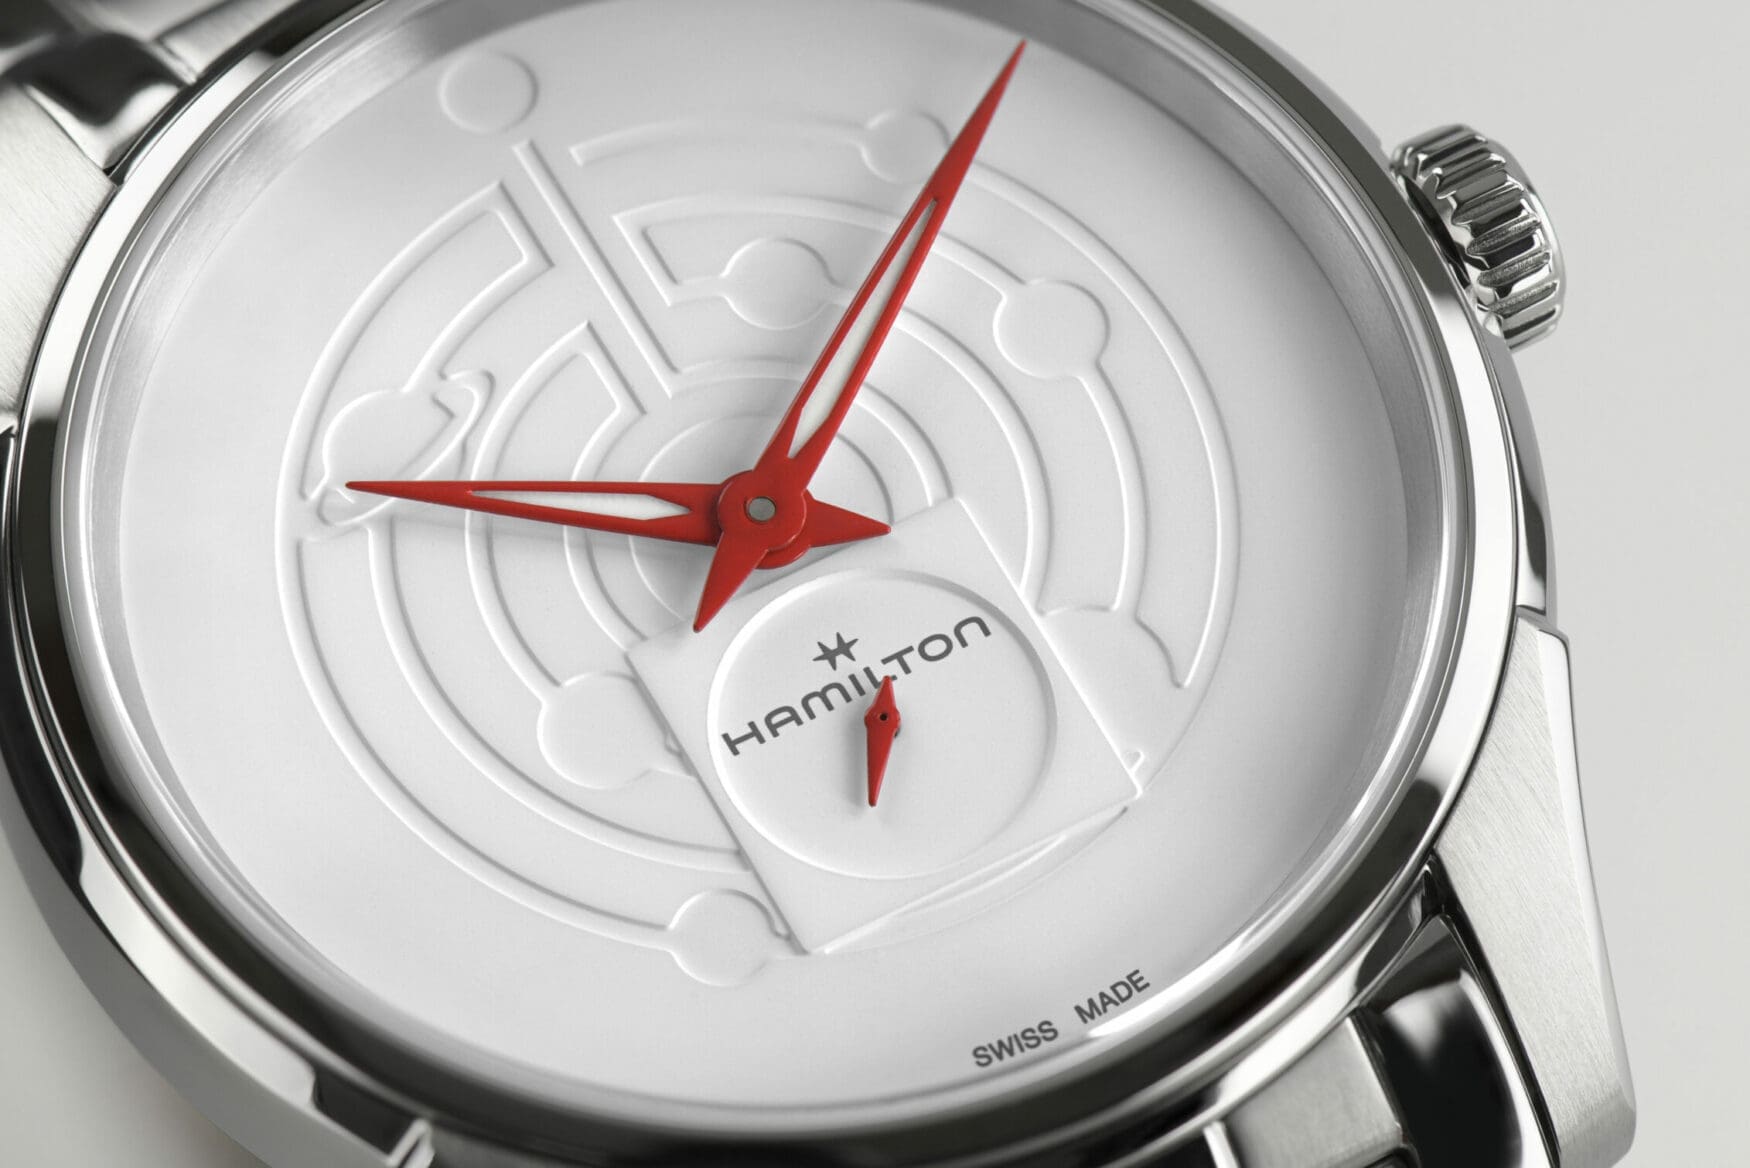 Hamilton Wandering Earth Special Edition white dial